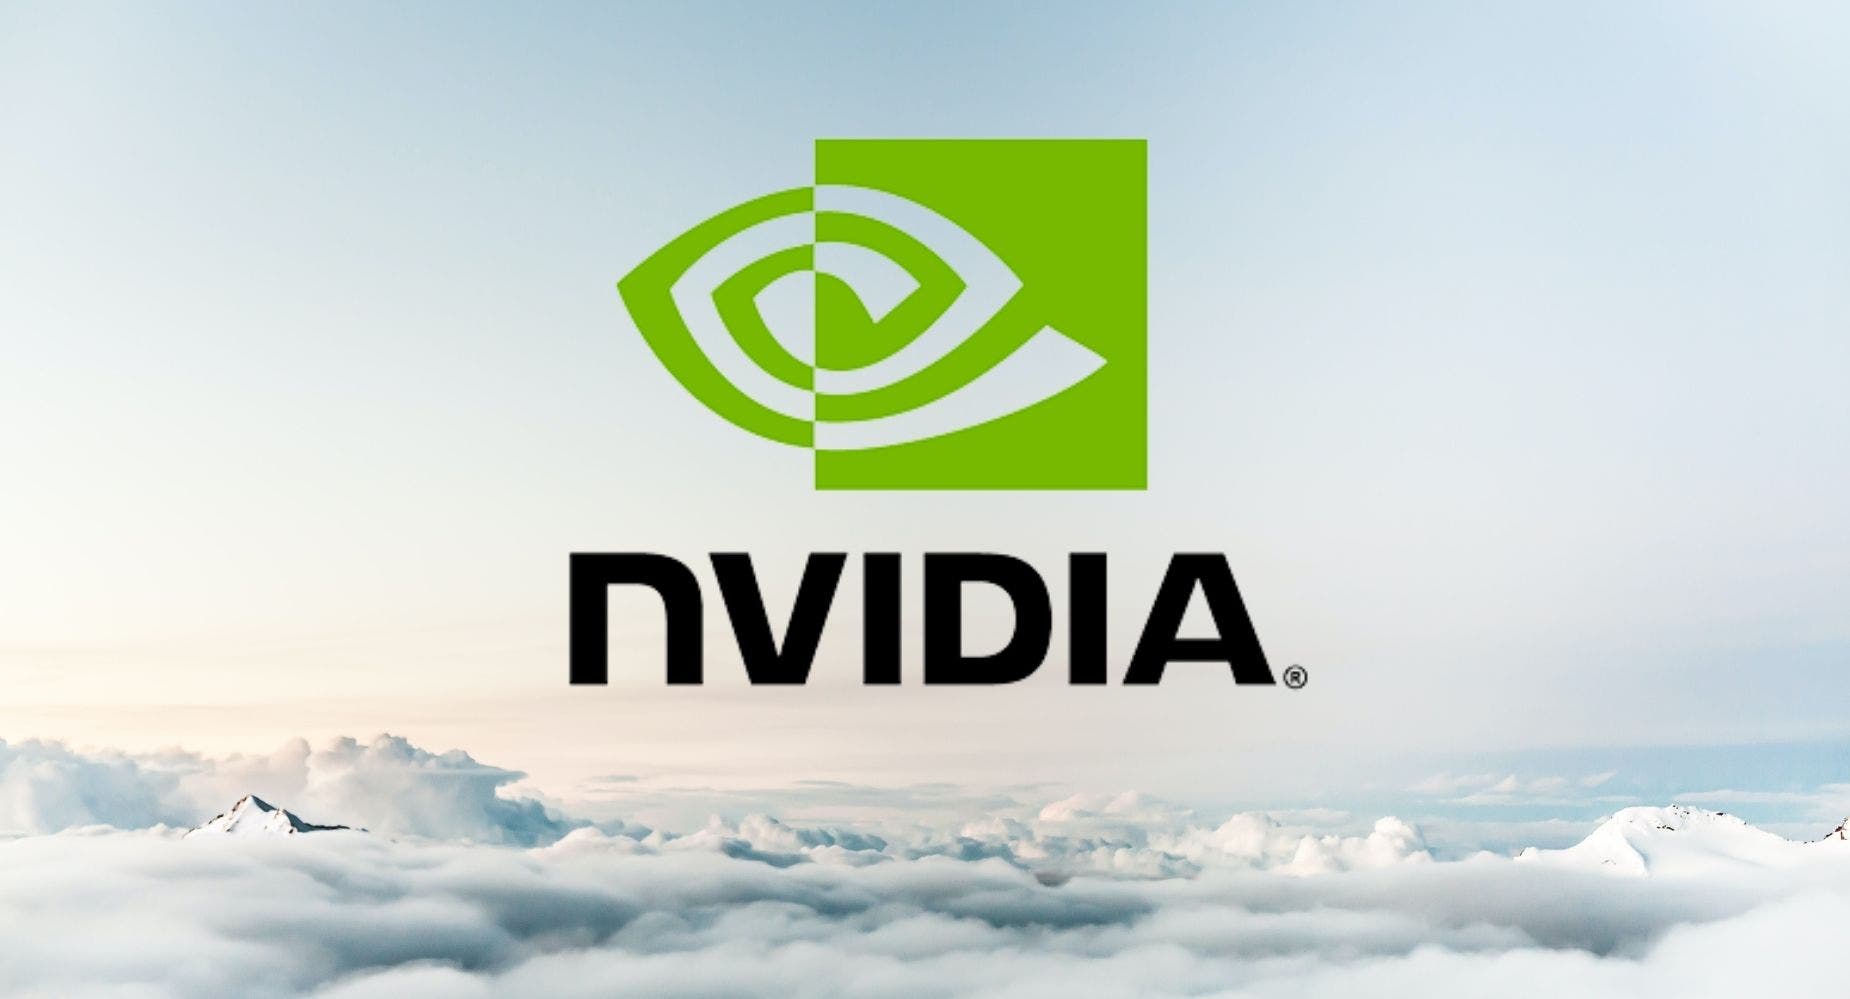 Traders Expecting Nvidia To Rally Post Q2 Print — Here's The Size Of The Anticipated Move